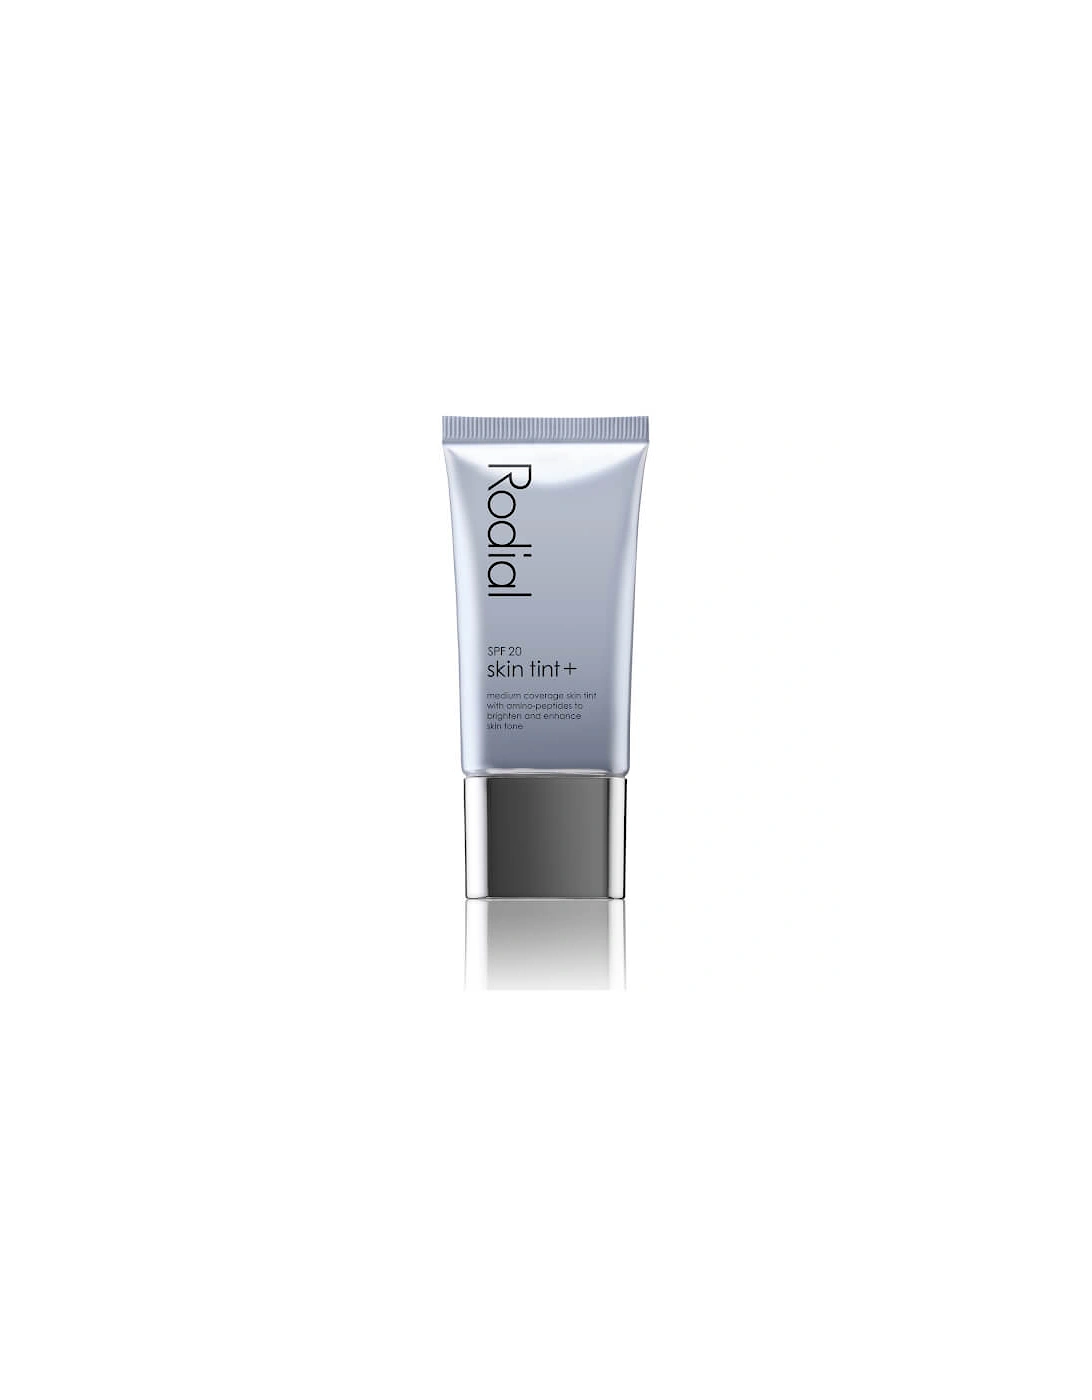 SPF20 Skin Tint - Capri - - SPF20 Skin Tint - Capri - SPF20 Skin Tint - New York - SPF20 Skin Tint - Hamptons - SPF20 Skin Tint - St. Barths - SPF20 Skin Tint - Rio - SPF20 Skin Tint - Miami, 2 of 1